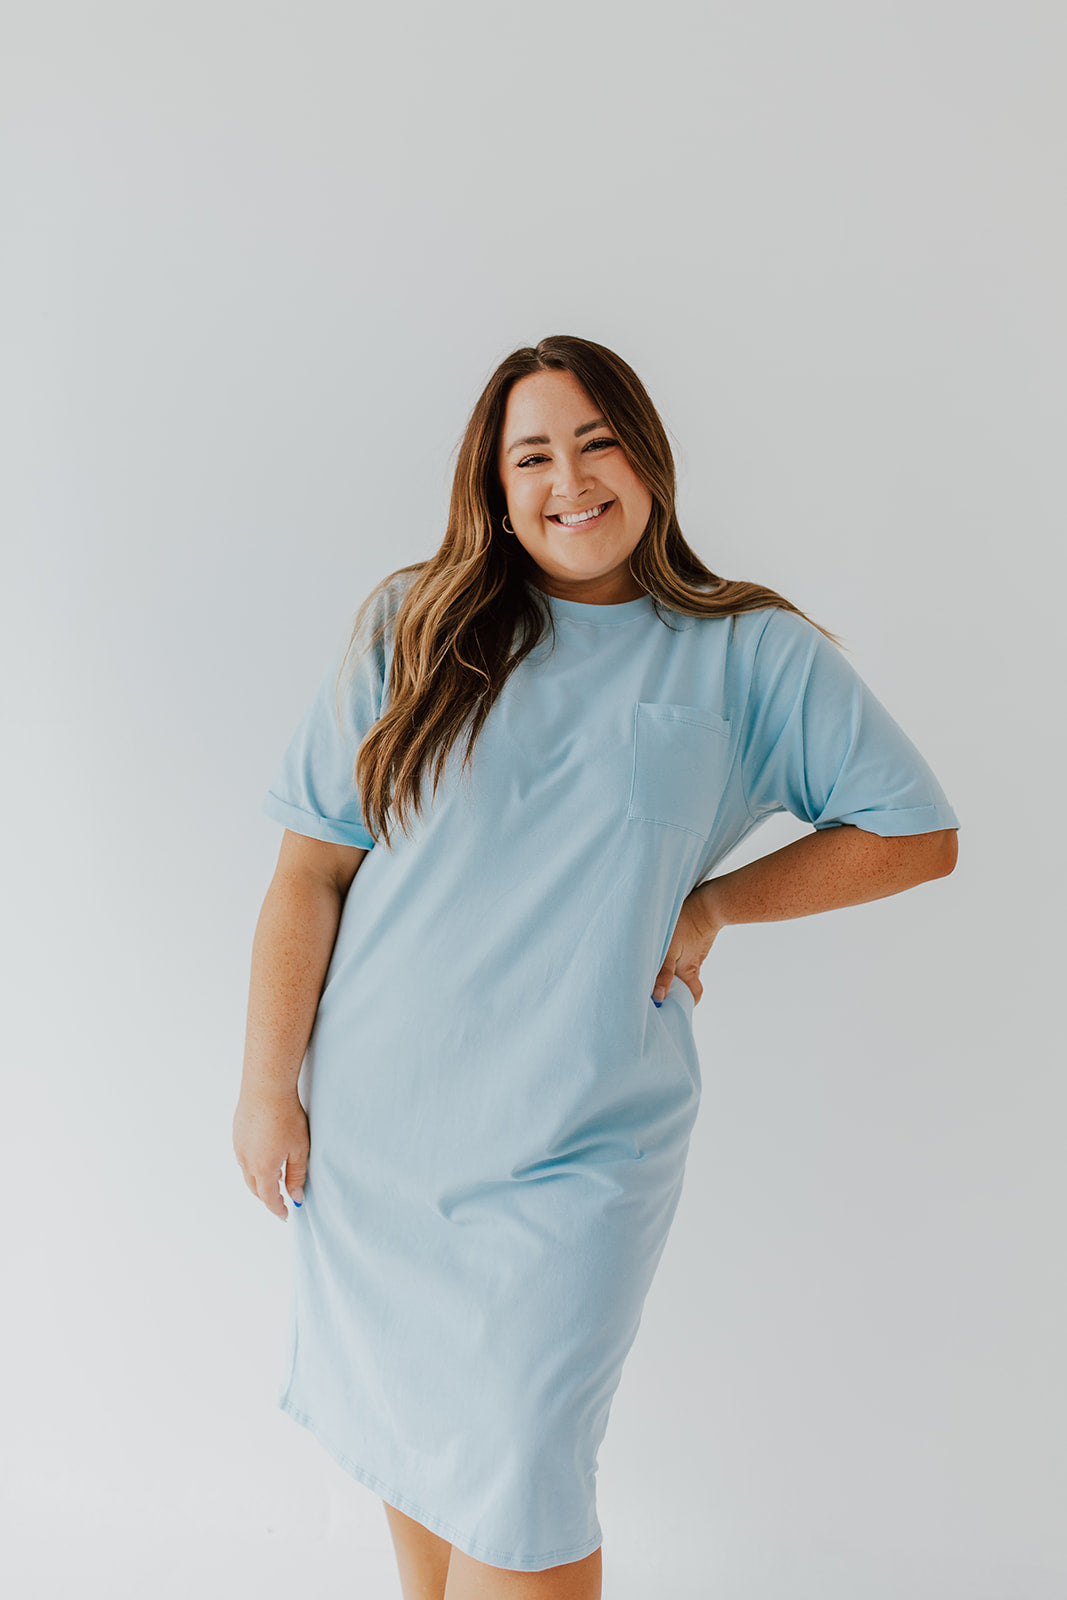 THE EASY DOES IT POCKET T-SHIRT DRESS BY PINK DESERT IN BABY BLUE